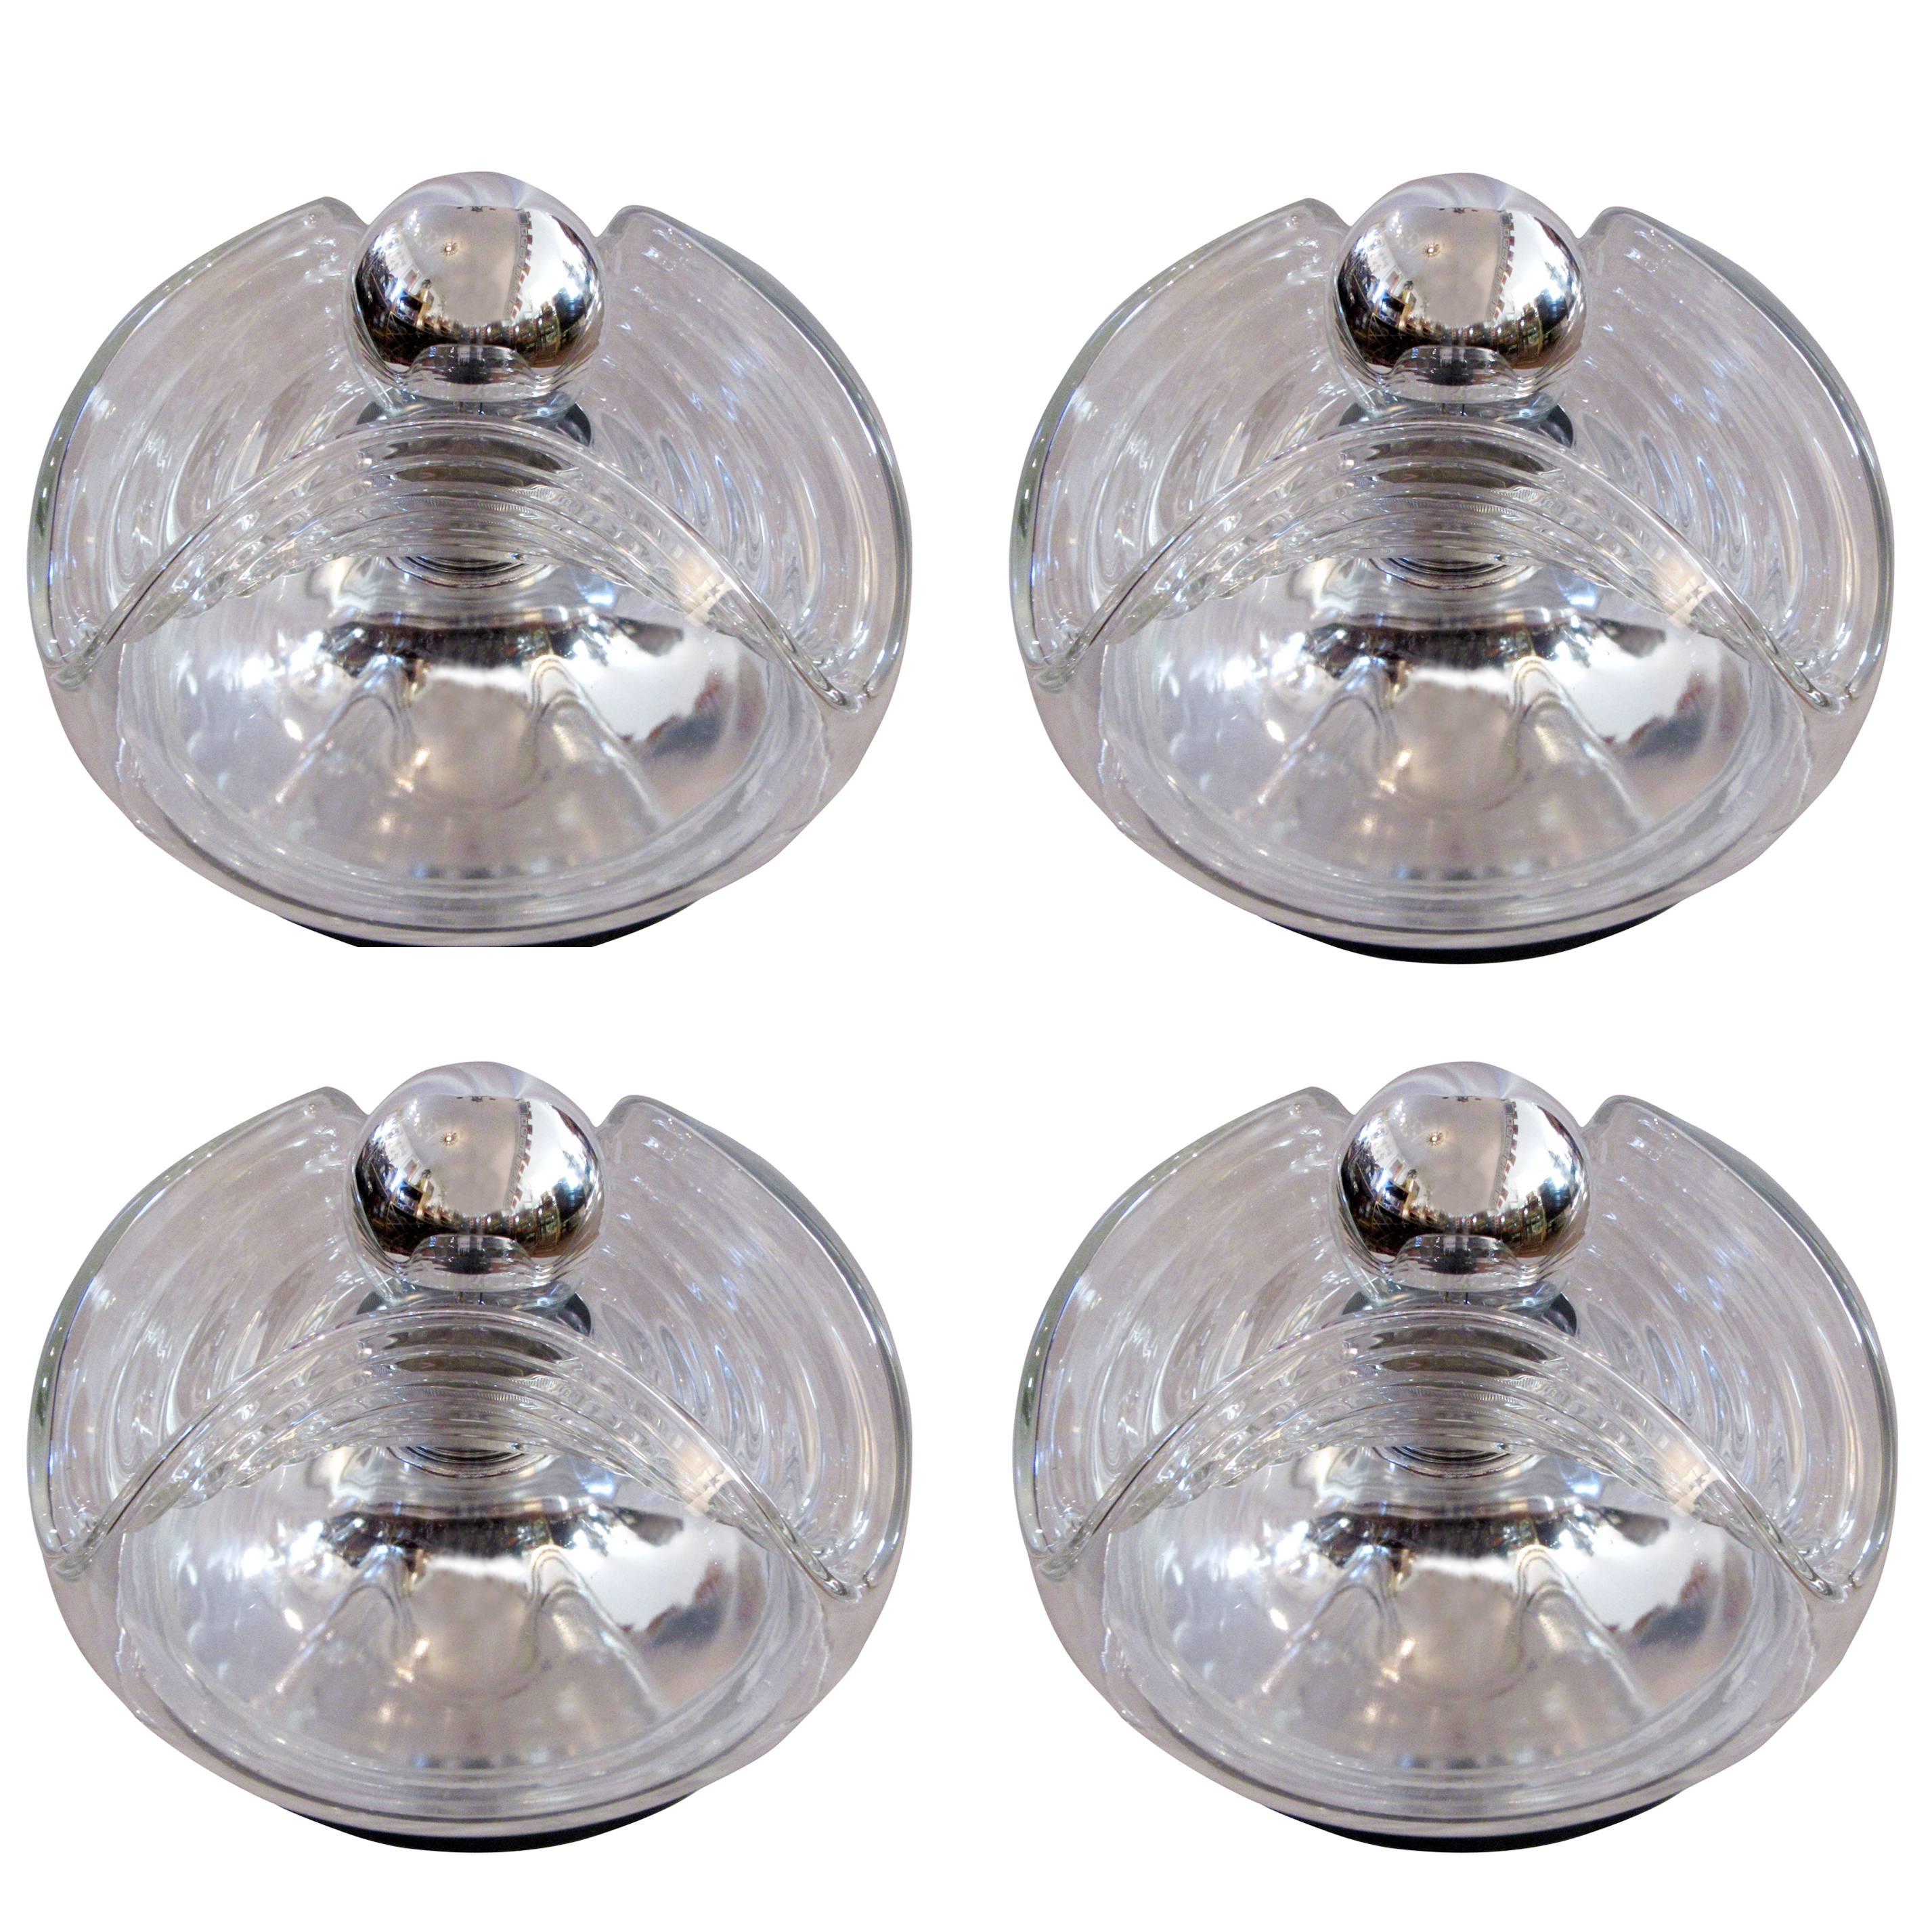 Group of Four Glass Flush Mount Light Fixtures Designed by Koch & Lowy